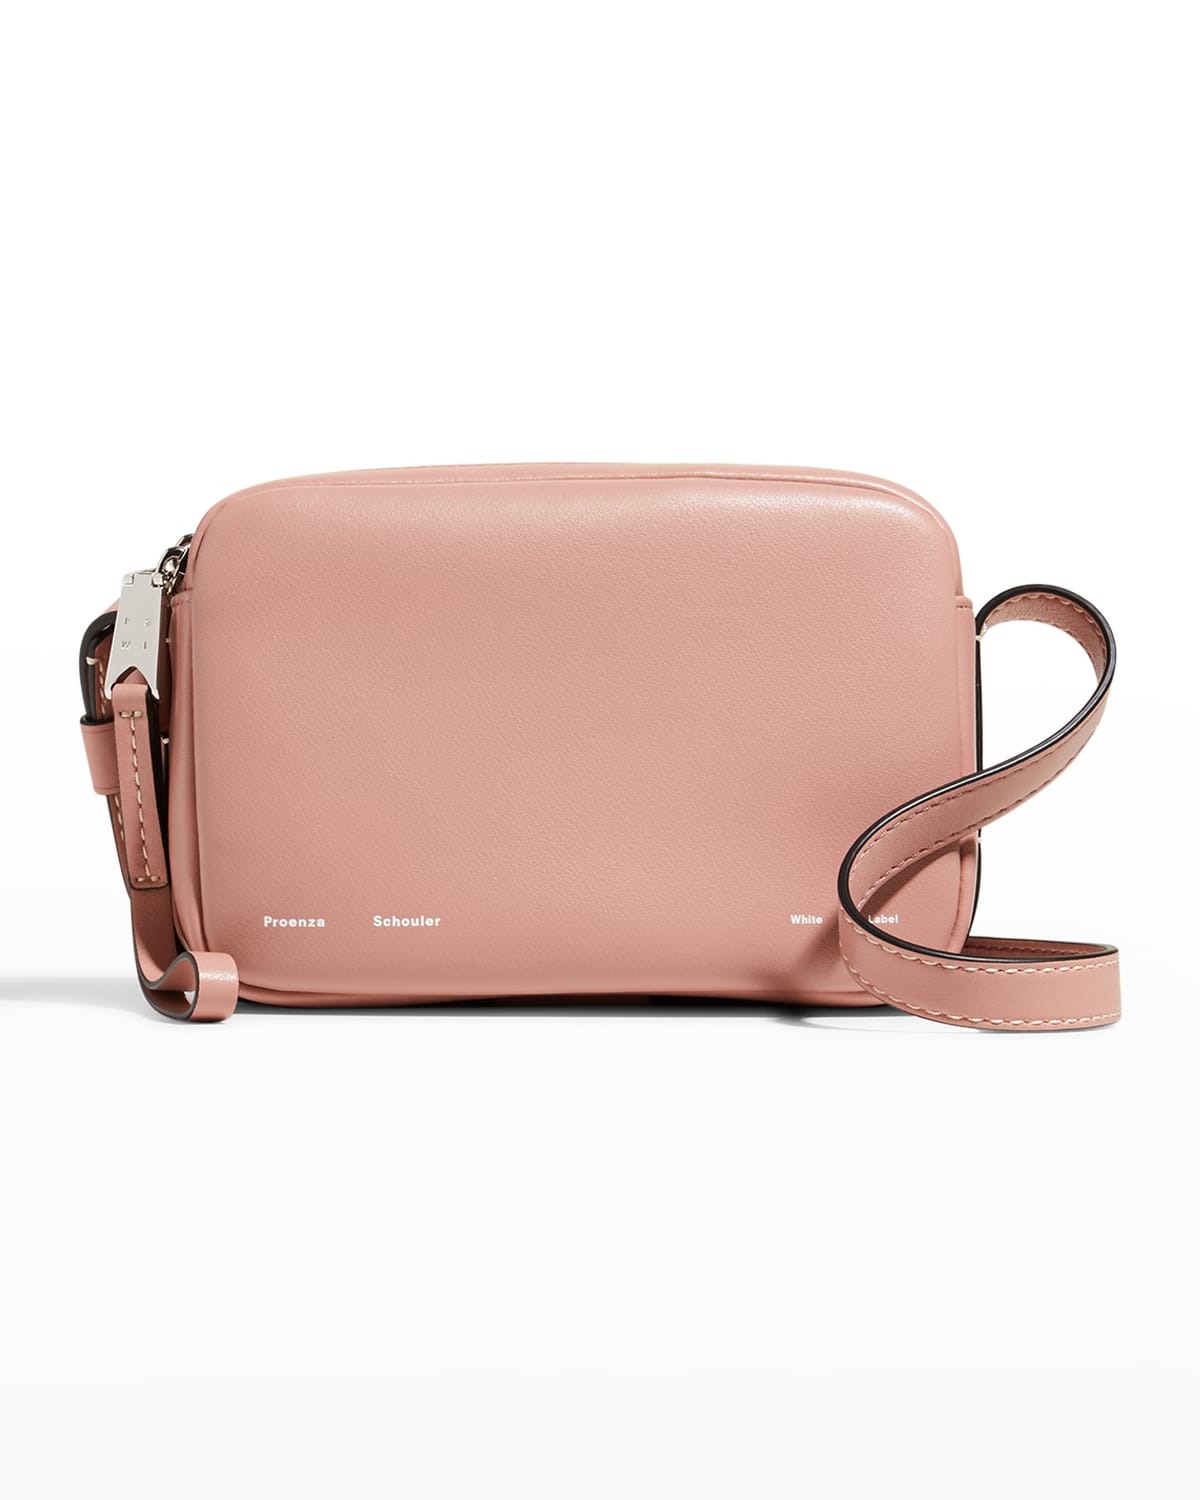 Proenza Schouler White Label Watts Leather Camera Shoulder Bag In Dusty Pink